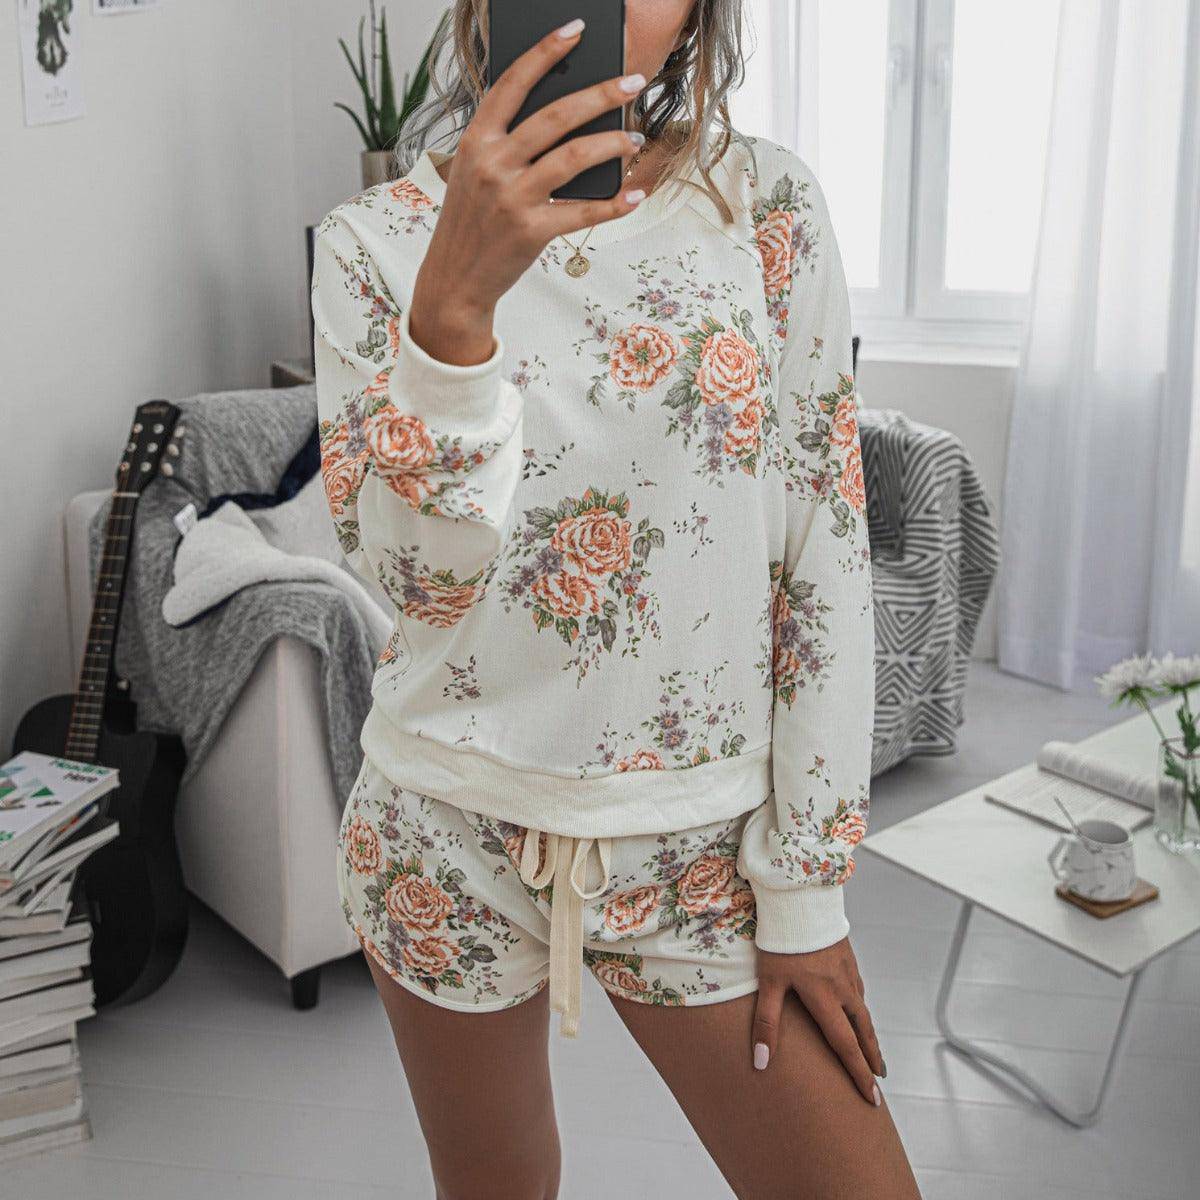 Kelsie Floral Long Sleeve Top and Shorts Set - Hot fashionista